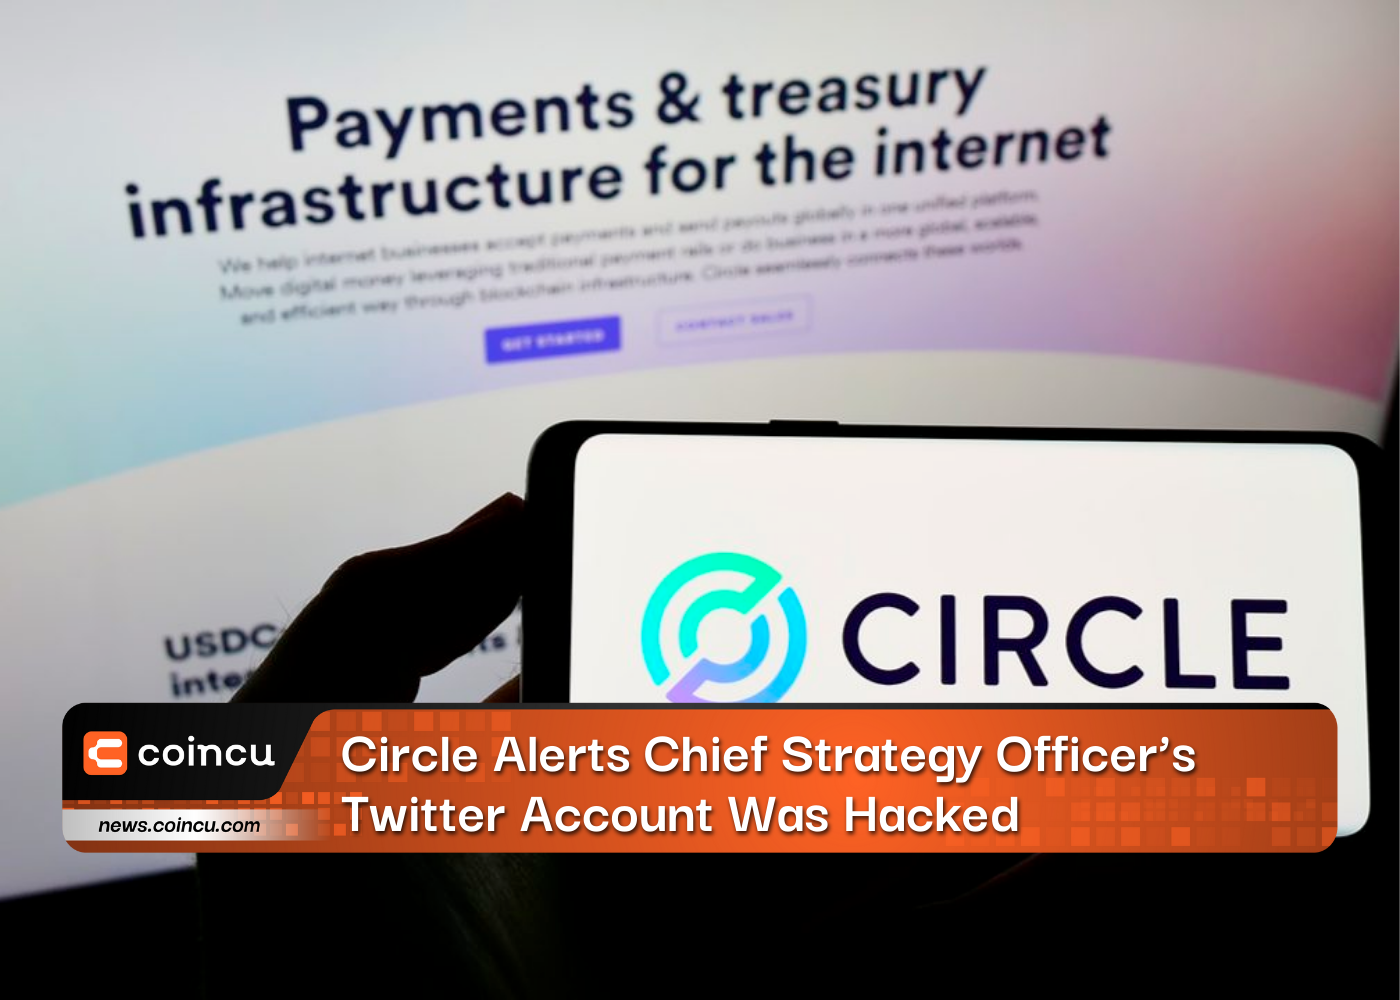 Circle Alerts Chief Strategy Officer’s Twitter Account Was Hacked